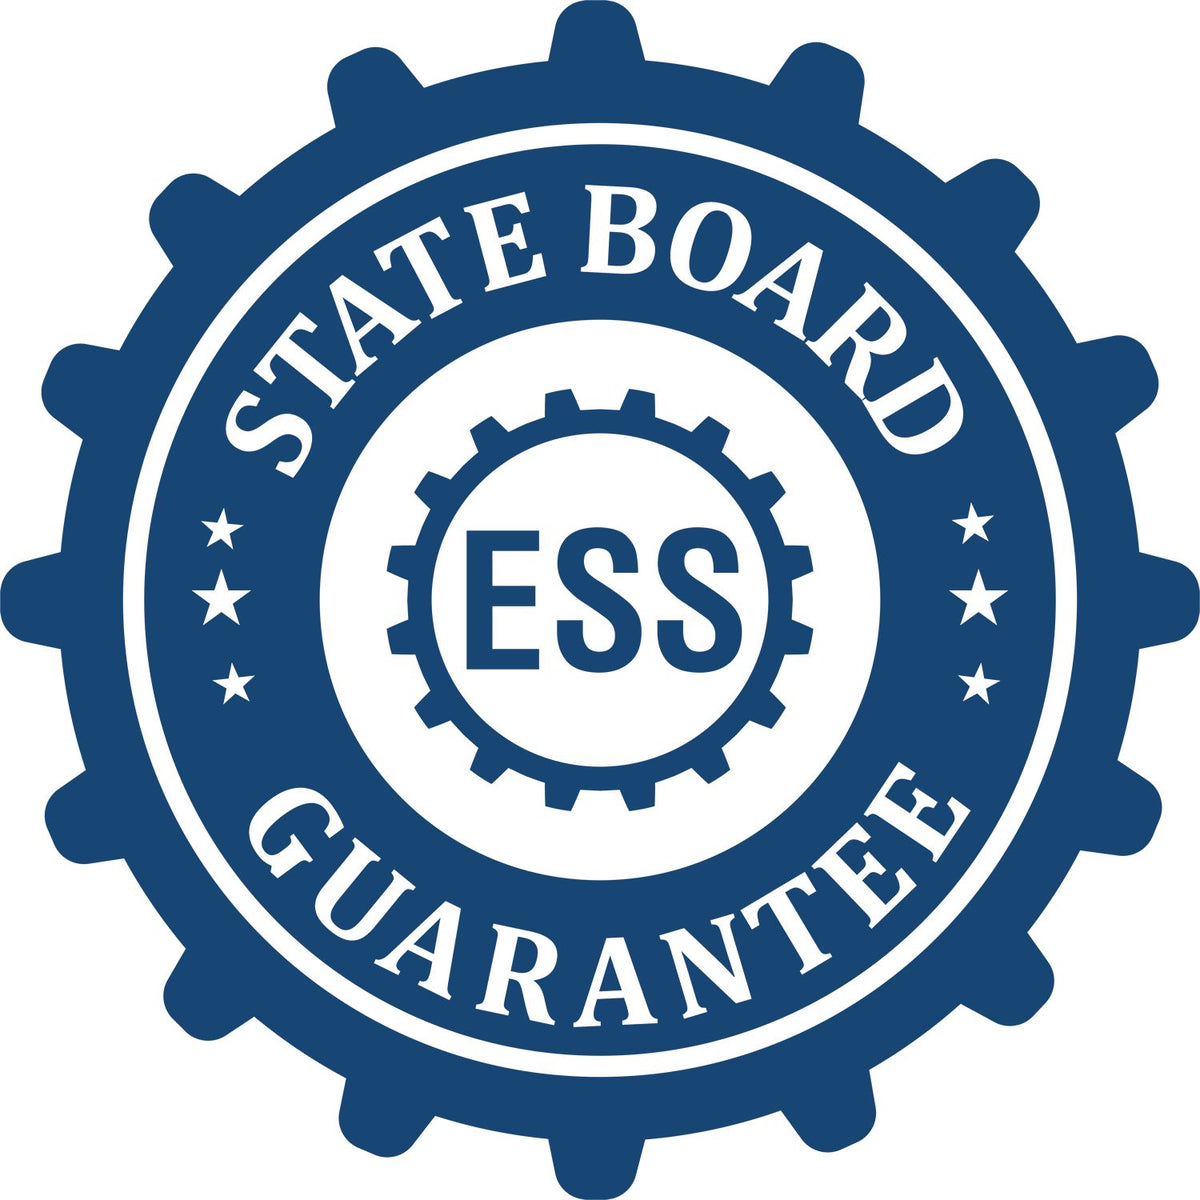 An emblem in a gear shape illustrating a state board guarantee for the Arizona Engineer Desk Seal product.